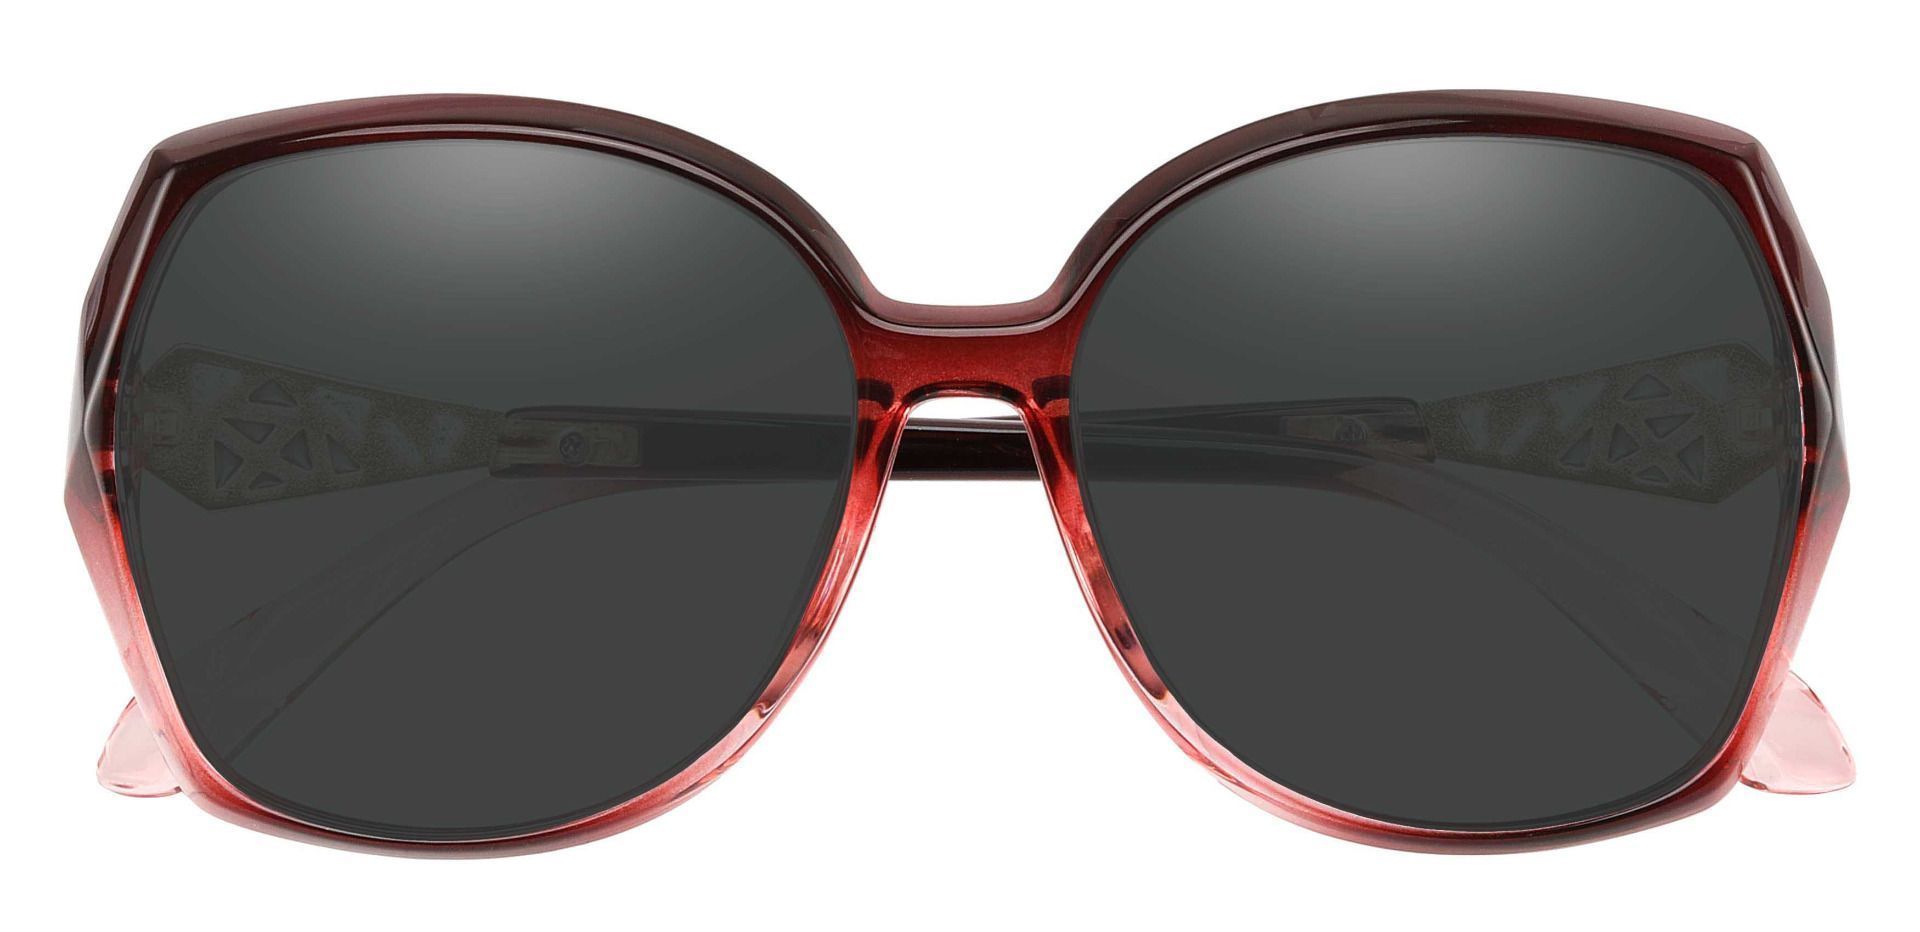 Swan Geometric Single Vision Sunglasses - Red Frame With Gray Lenses